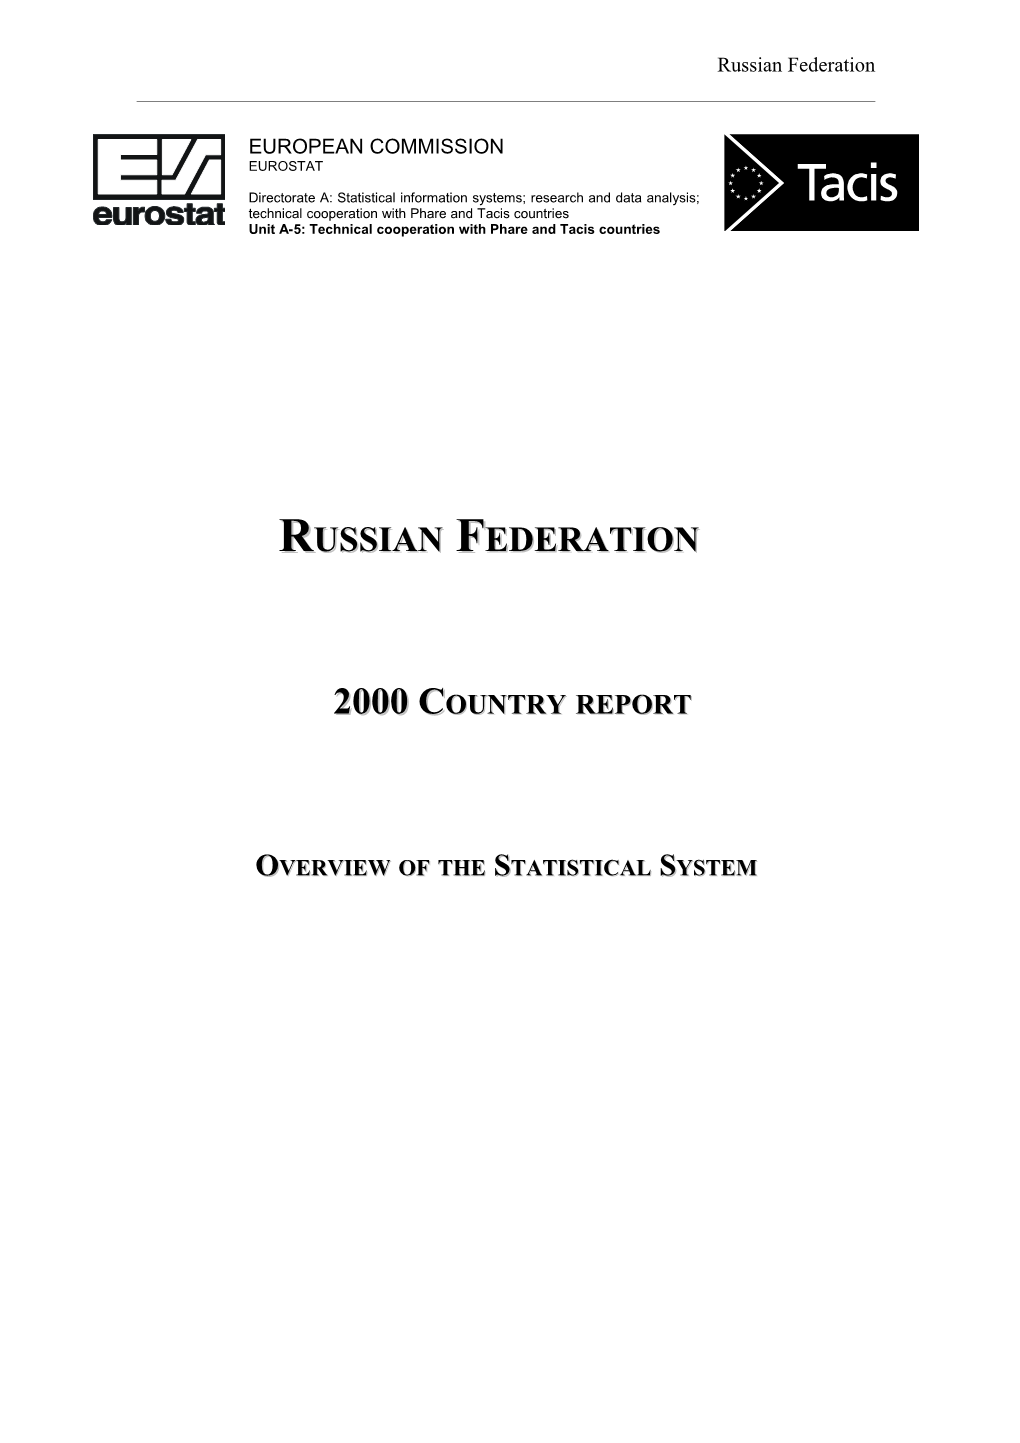 Russian Federation s1